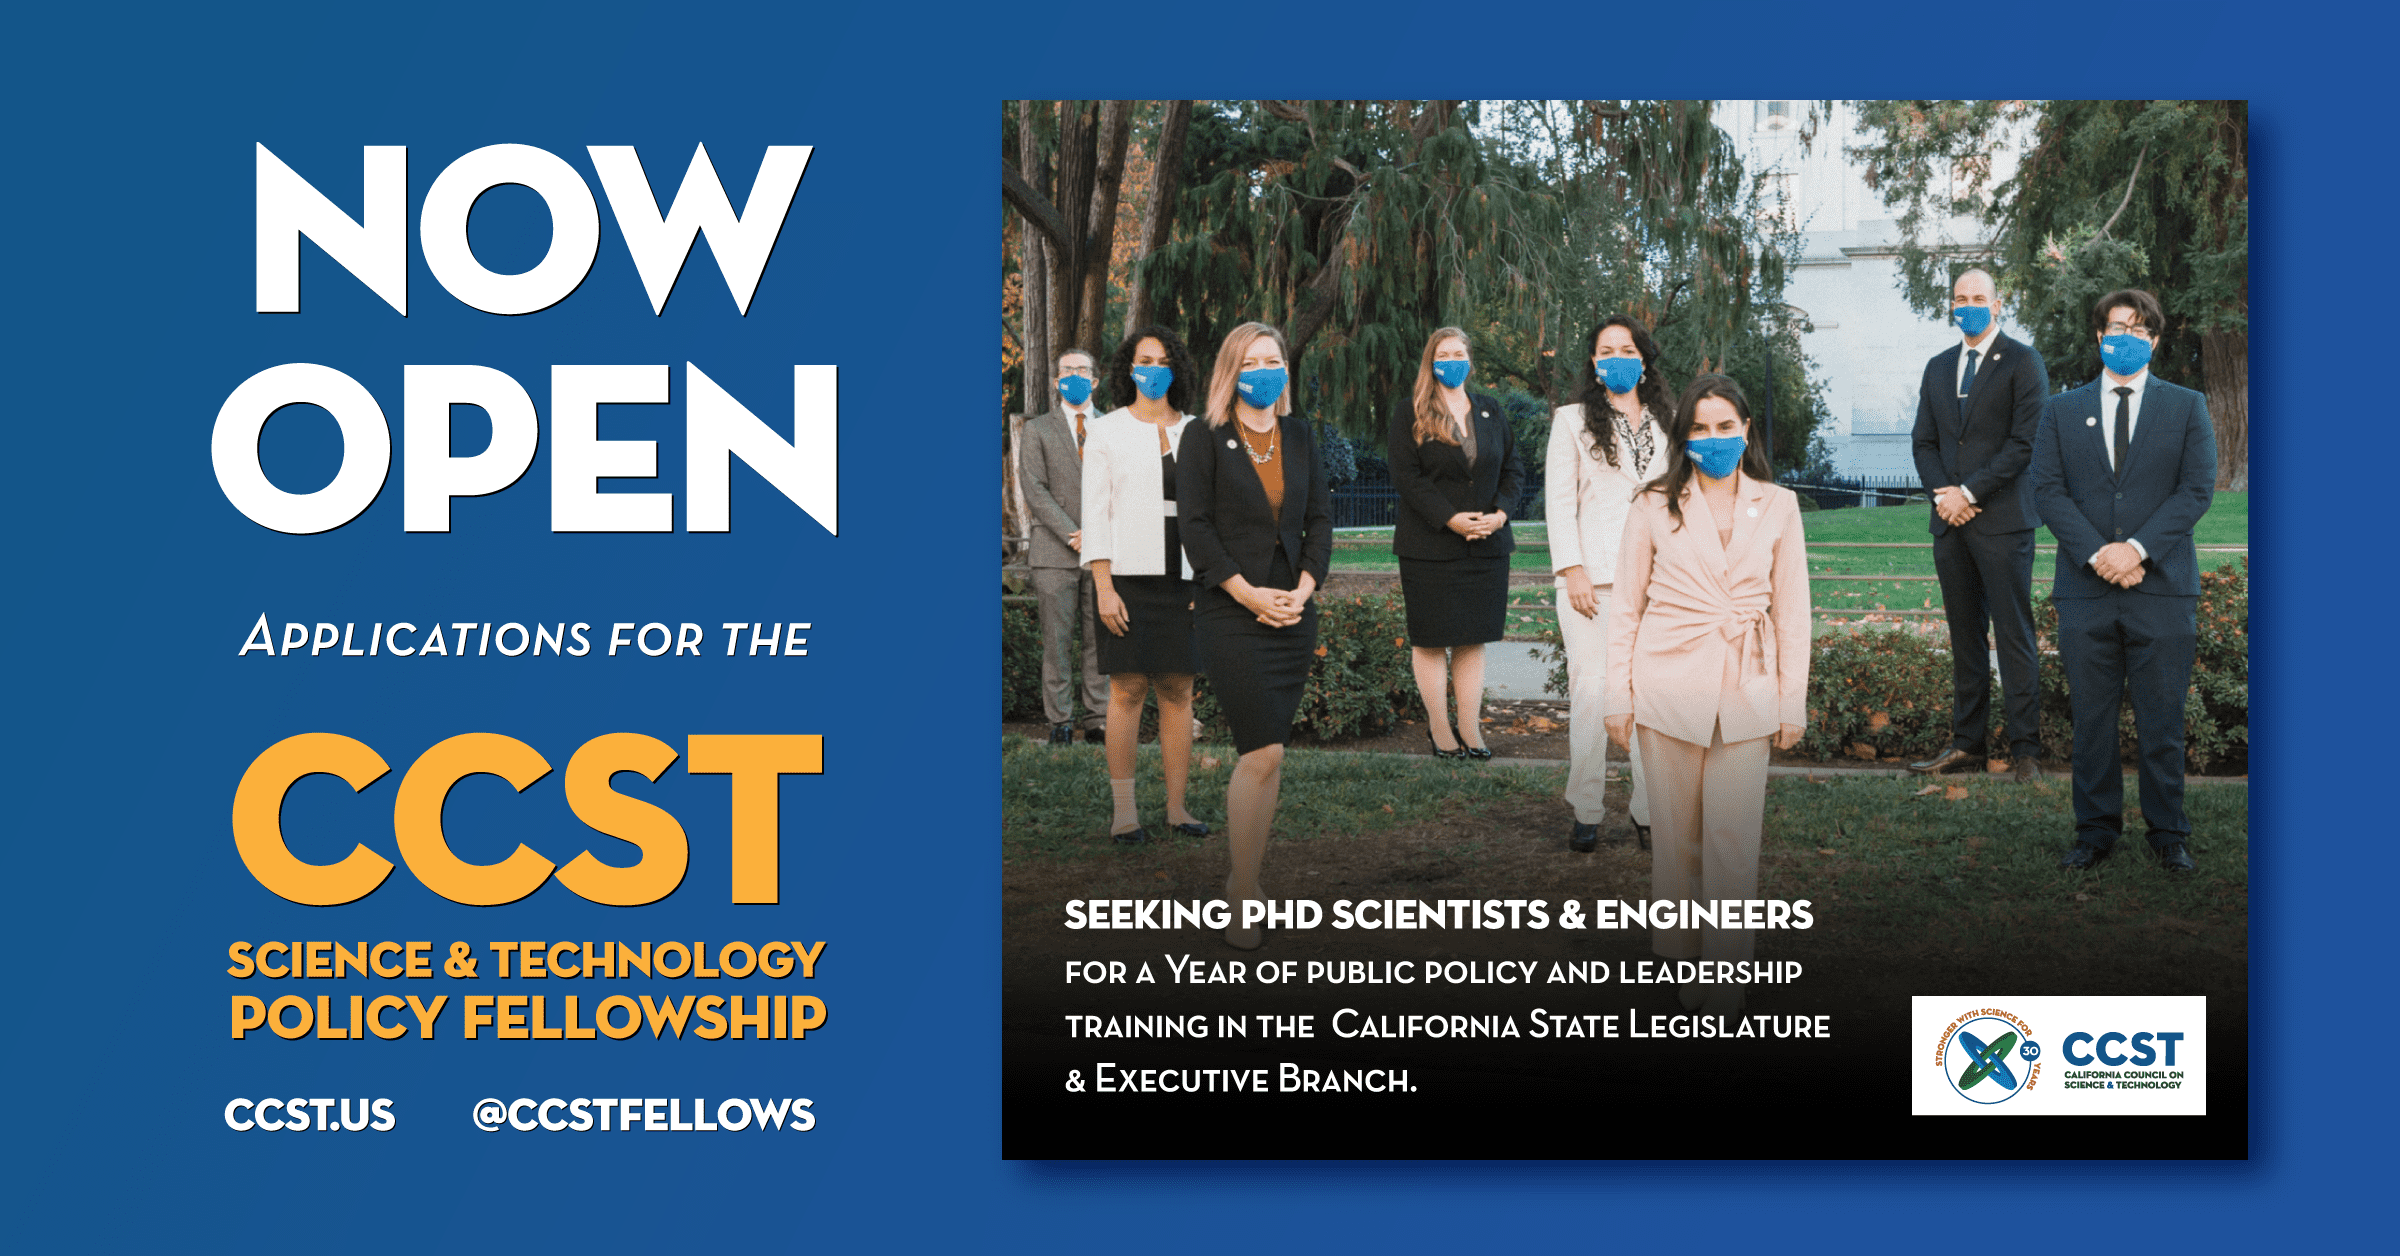 A graphic with a blue background and NOW OPEN in large text next to a photo of the 2021 Fellows